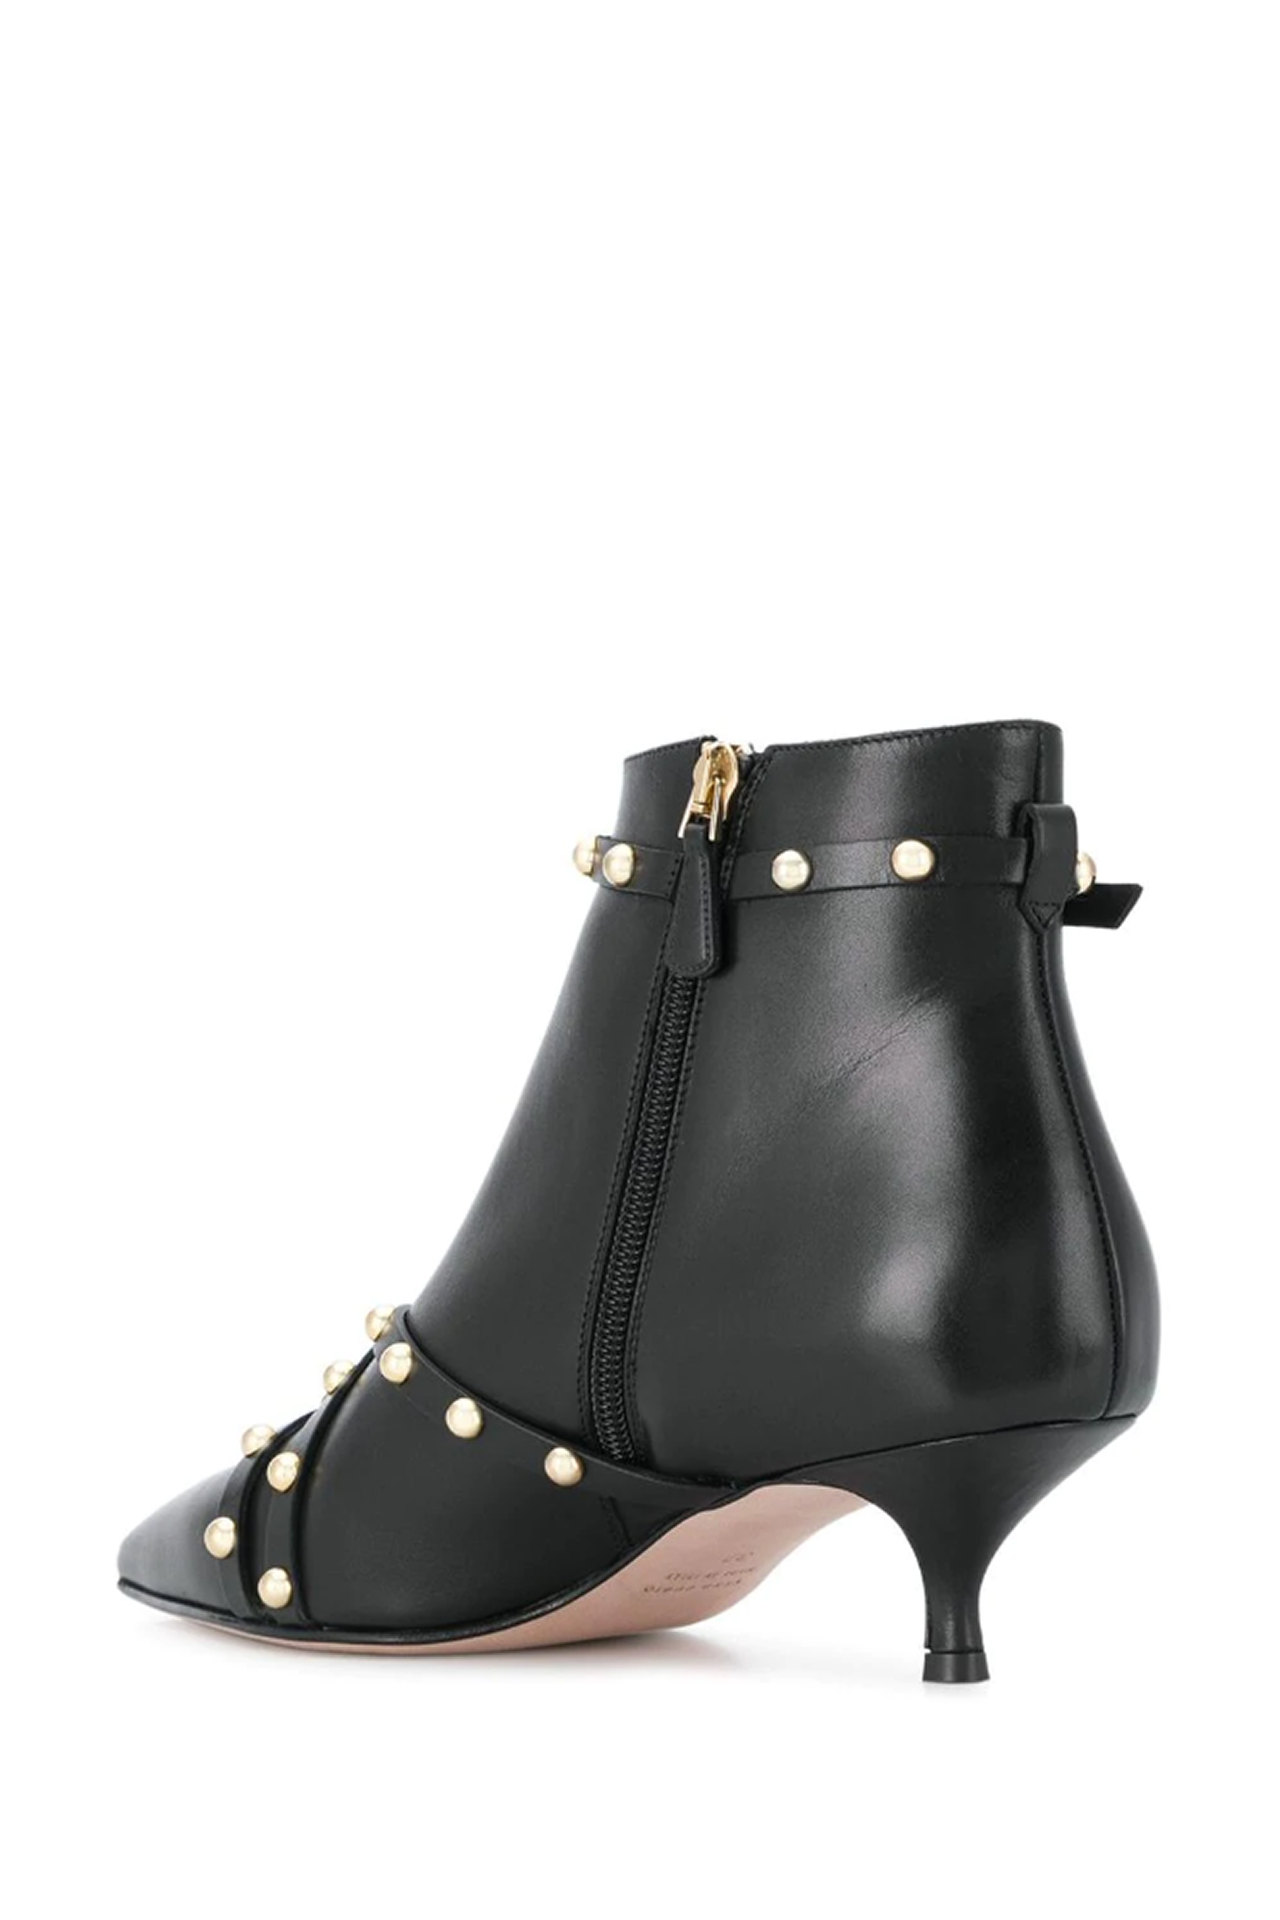 Red Valentino, ankle Boots